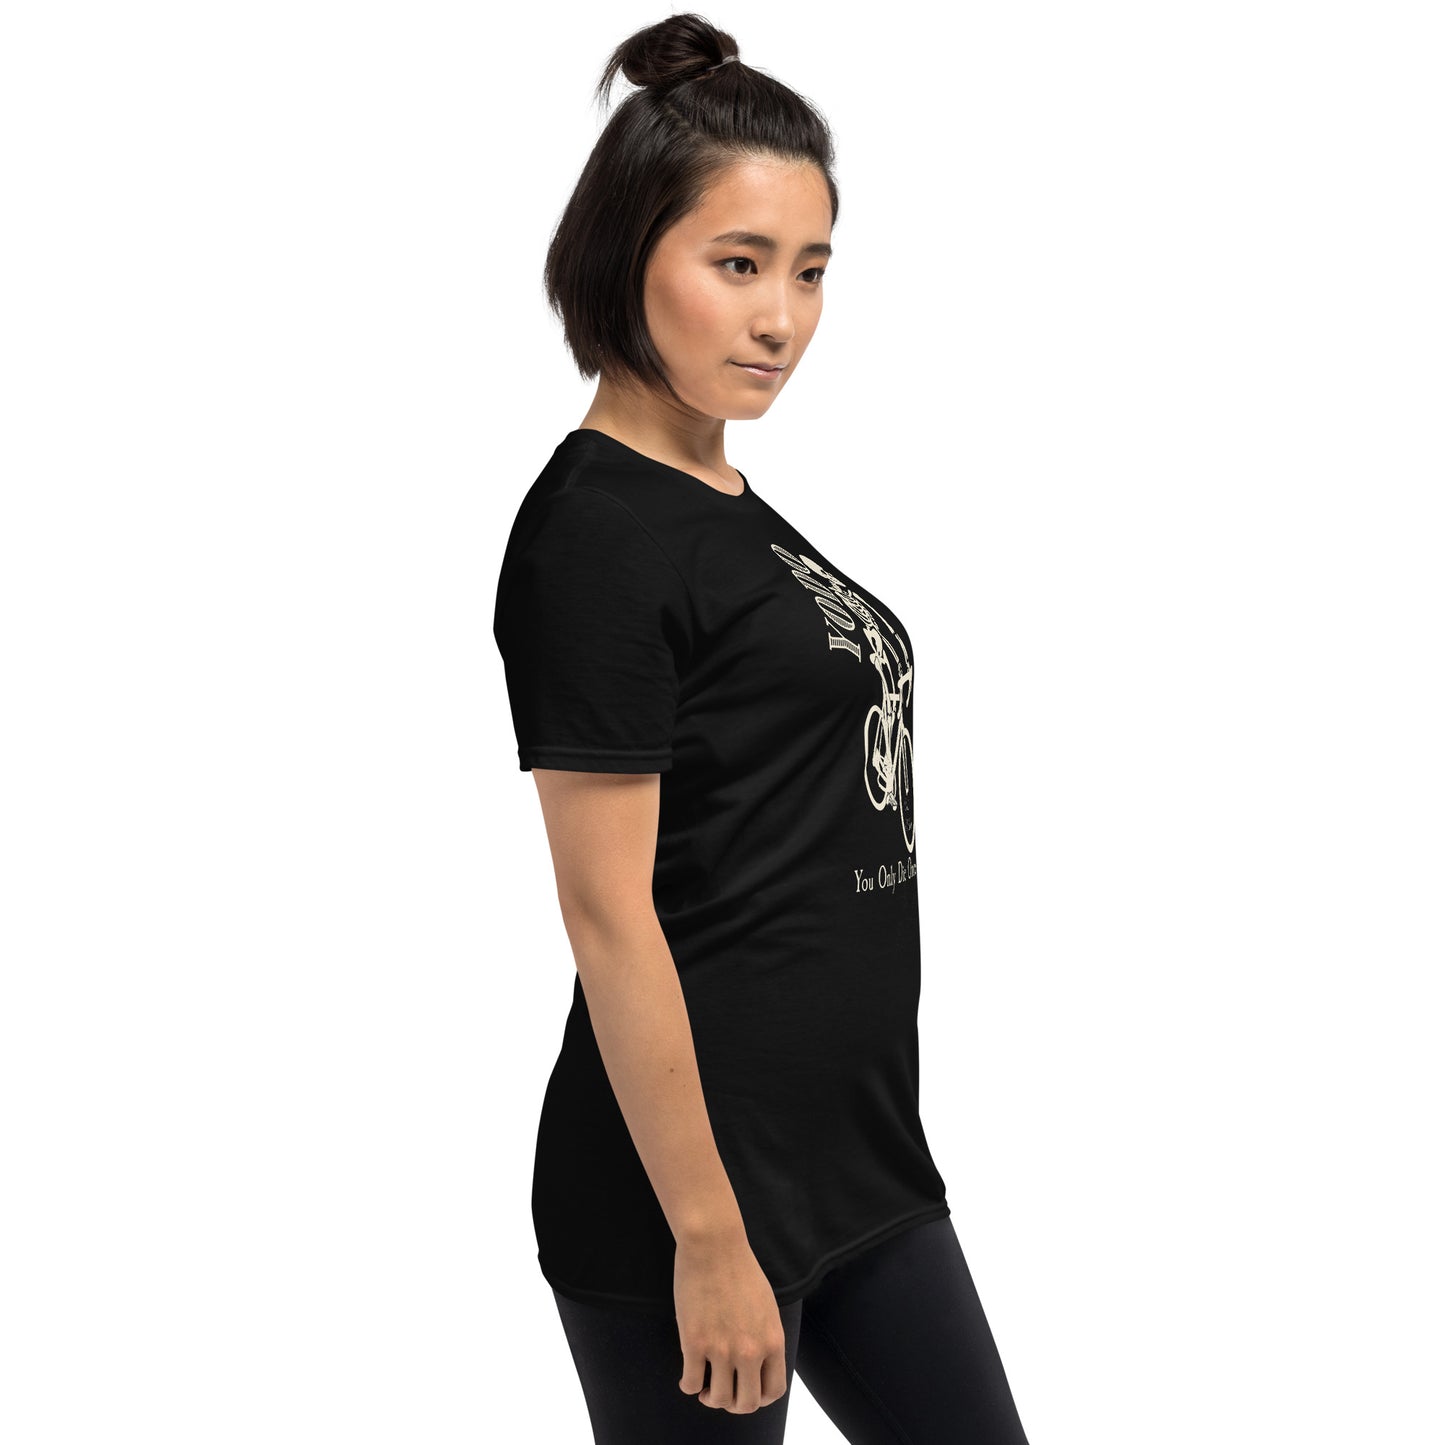 black "YODO" You Only Die Once Unisex Short-Sleeve T-shirt from Daily Dreadful